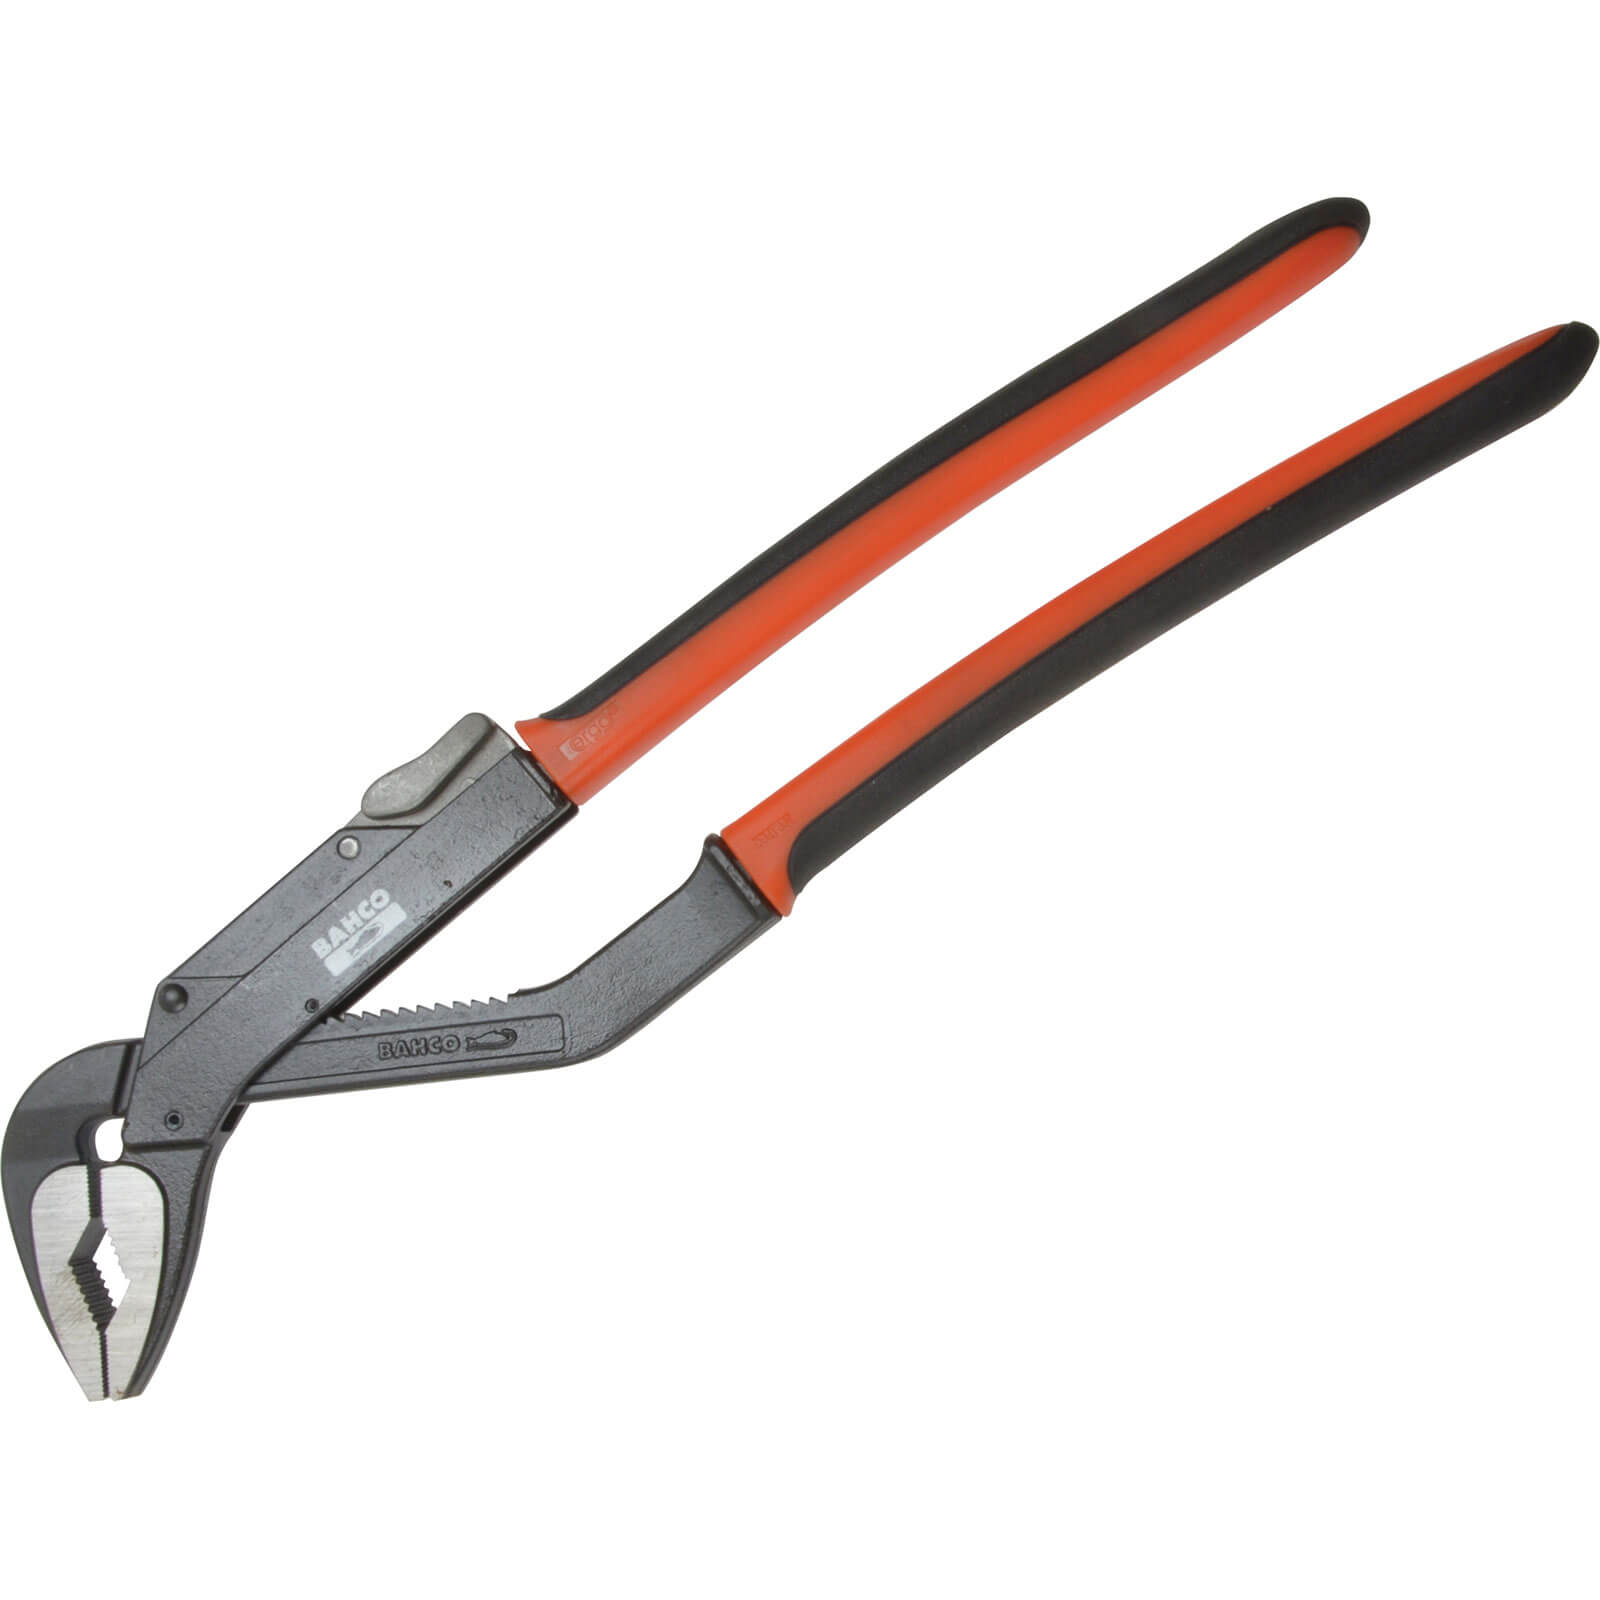 Photo of Bahco 822 Slip Joint Pliers Ergo Handle 400mm